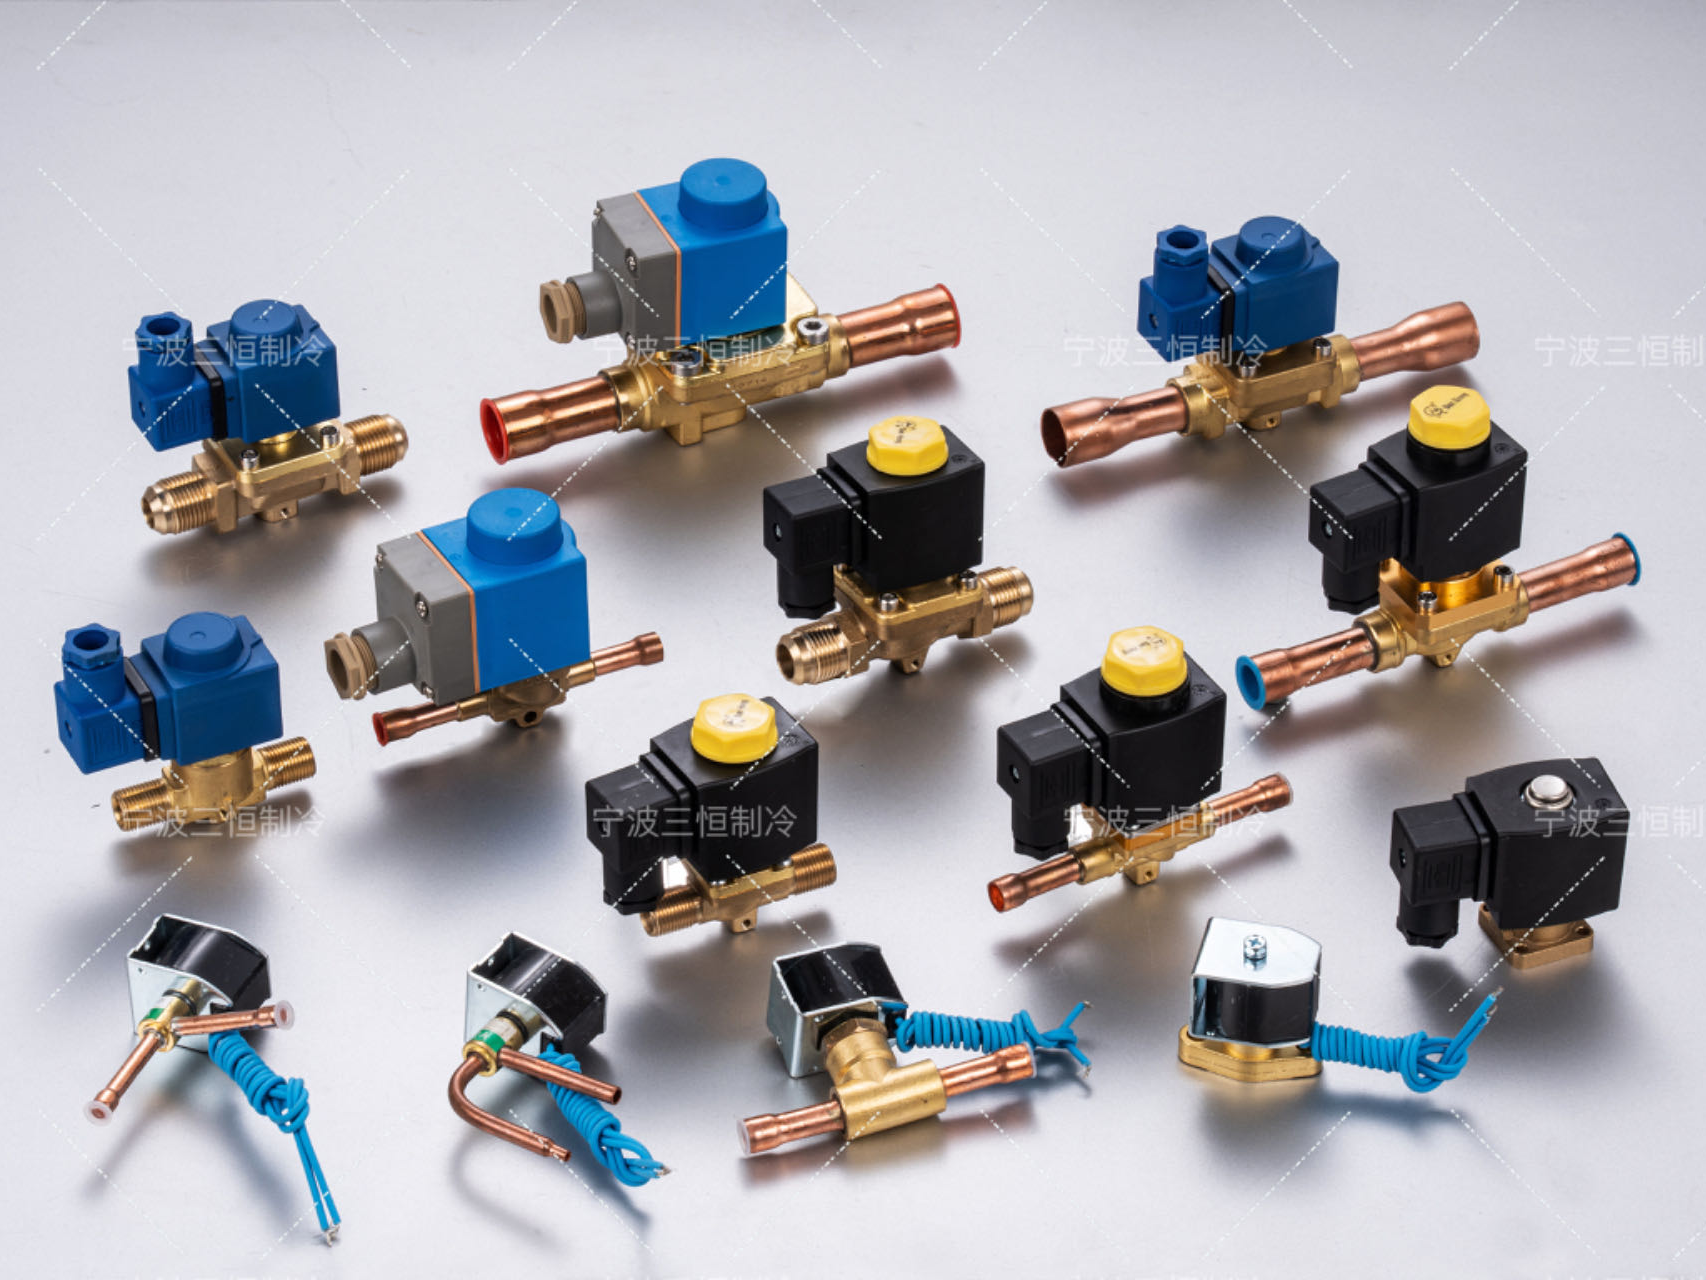 The function and selection of the solenoid valve in the cold storage unit